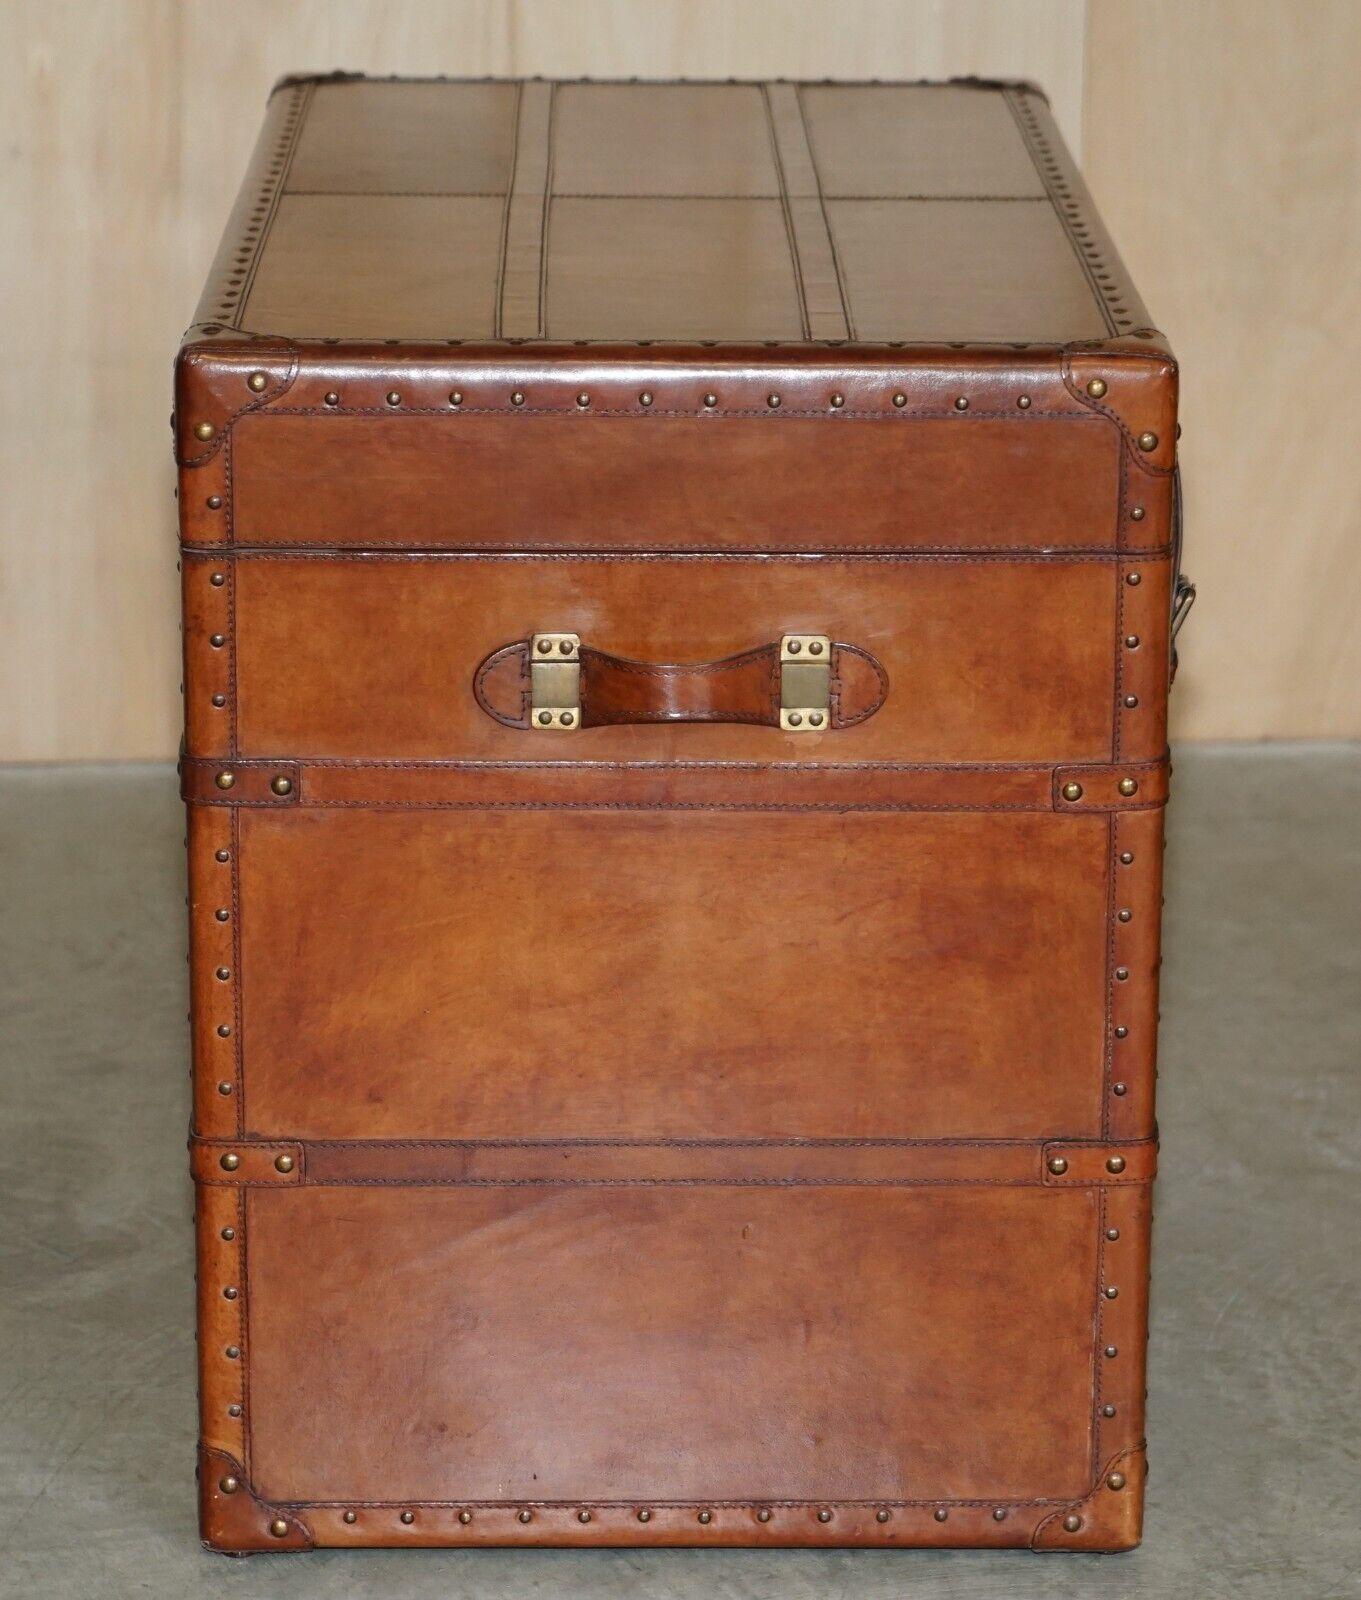 Hand-Crafted Large Vintage Age Brown Leather Bound Steamer Linen Trunk with Velvet Lining